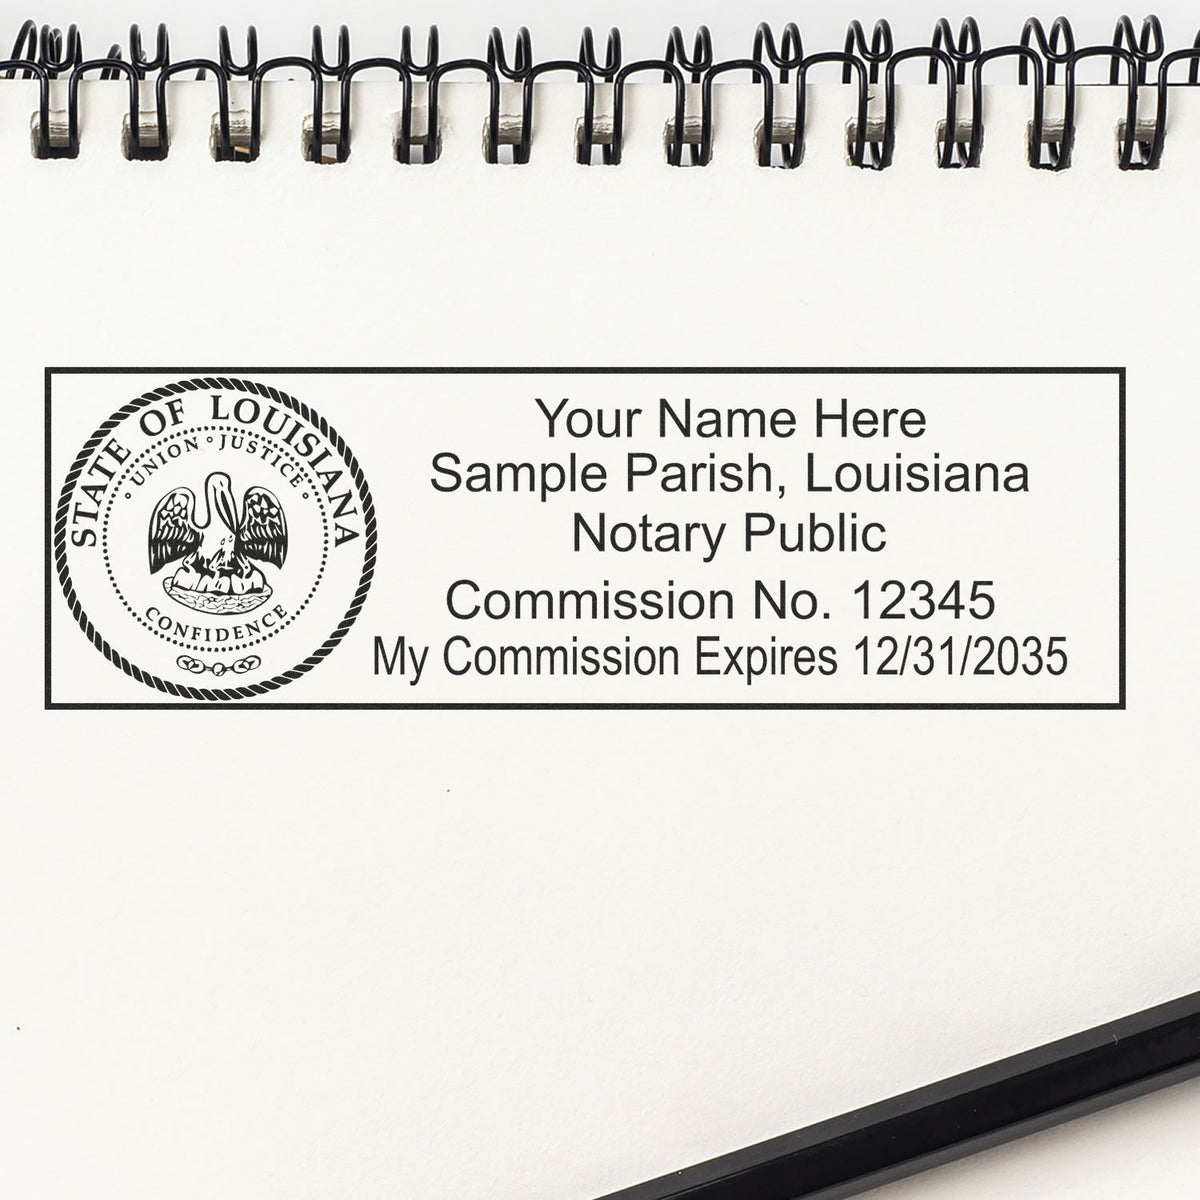 The Slim Pre-Inked State Seal Notary Stamp for Louisiana stamp impression comes to life with a crisp, detailed photo on paper - showcasing true professional quality.